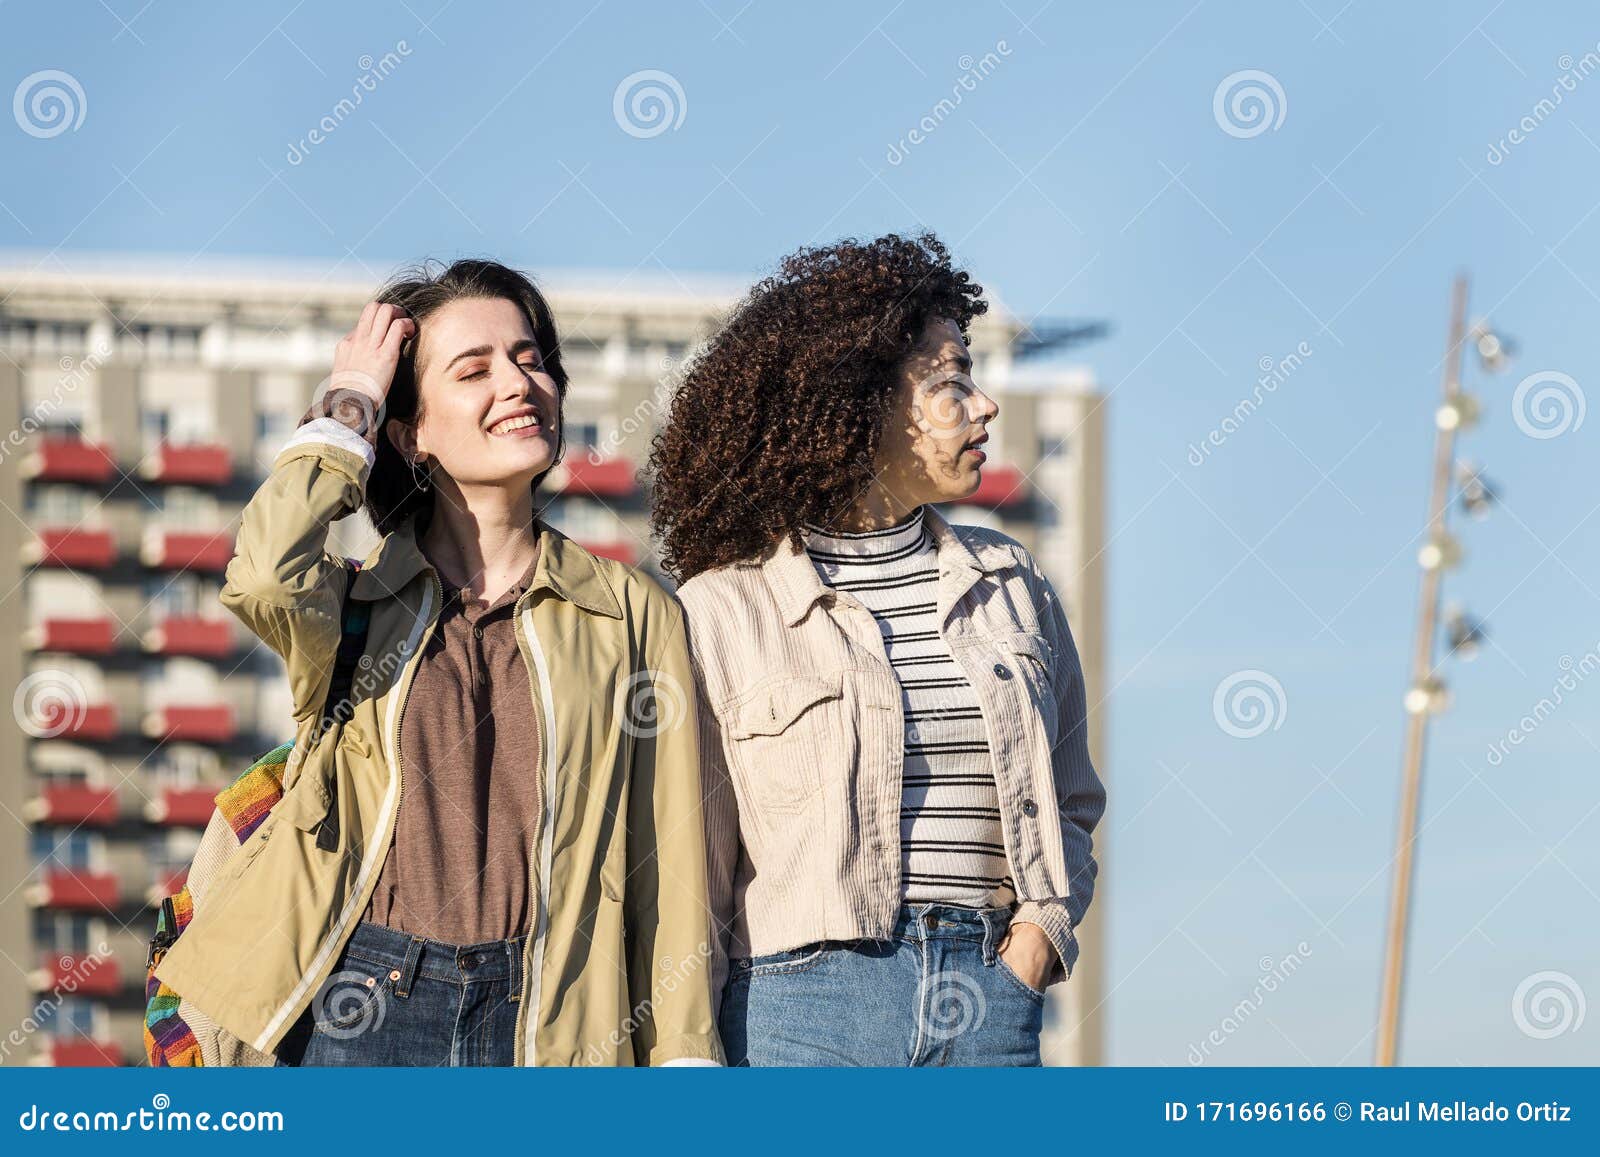 Two Young Girls Walking in the City Holding Hands Stock Photo image photo